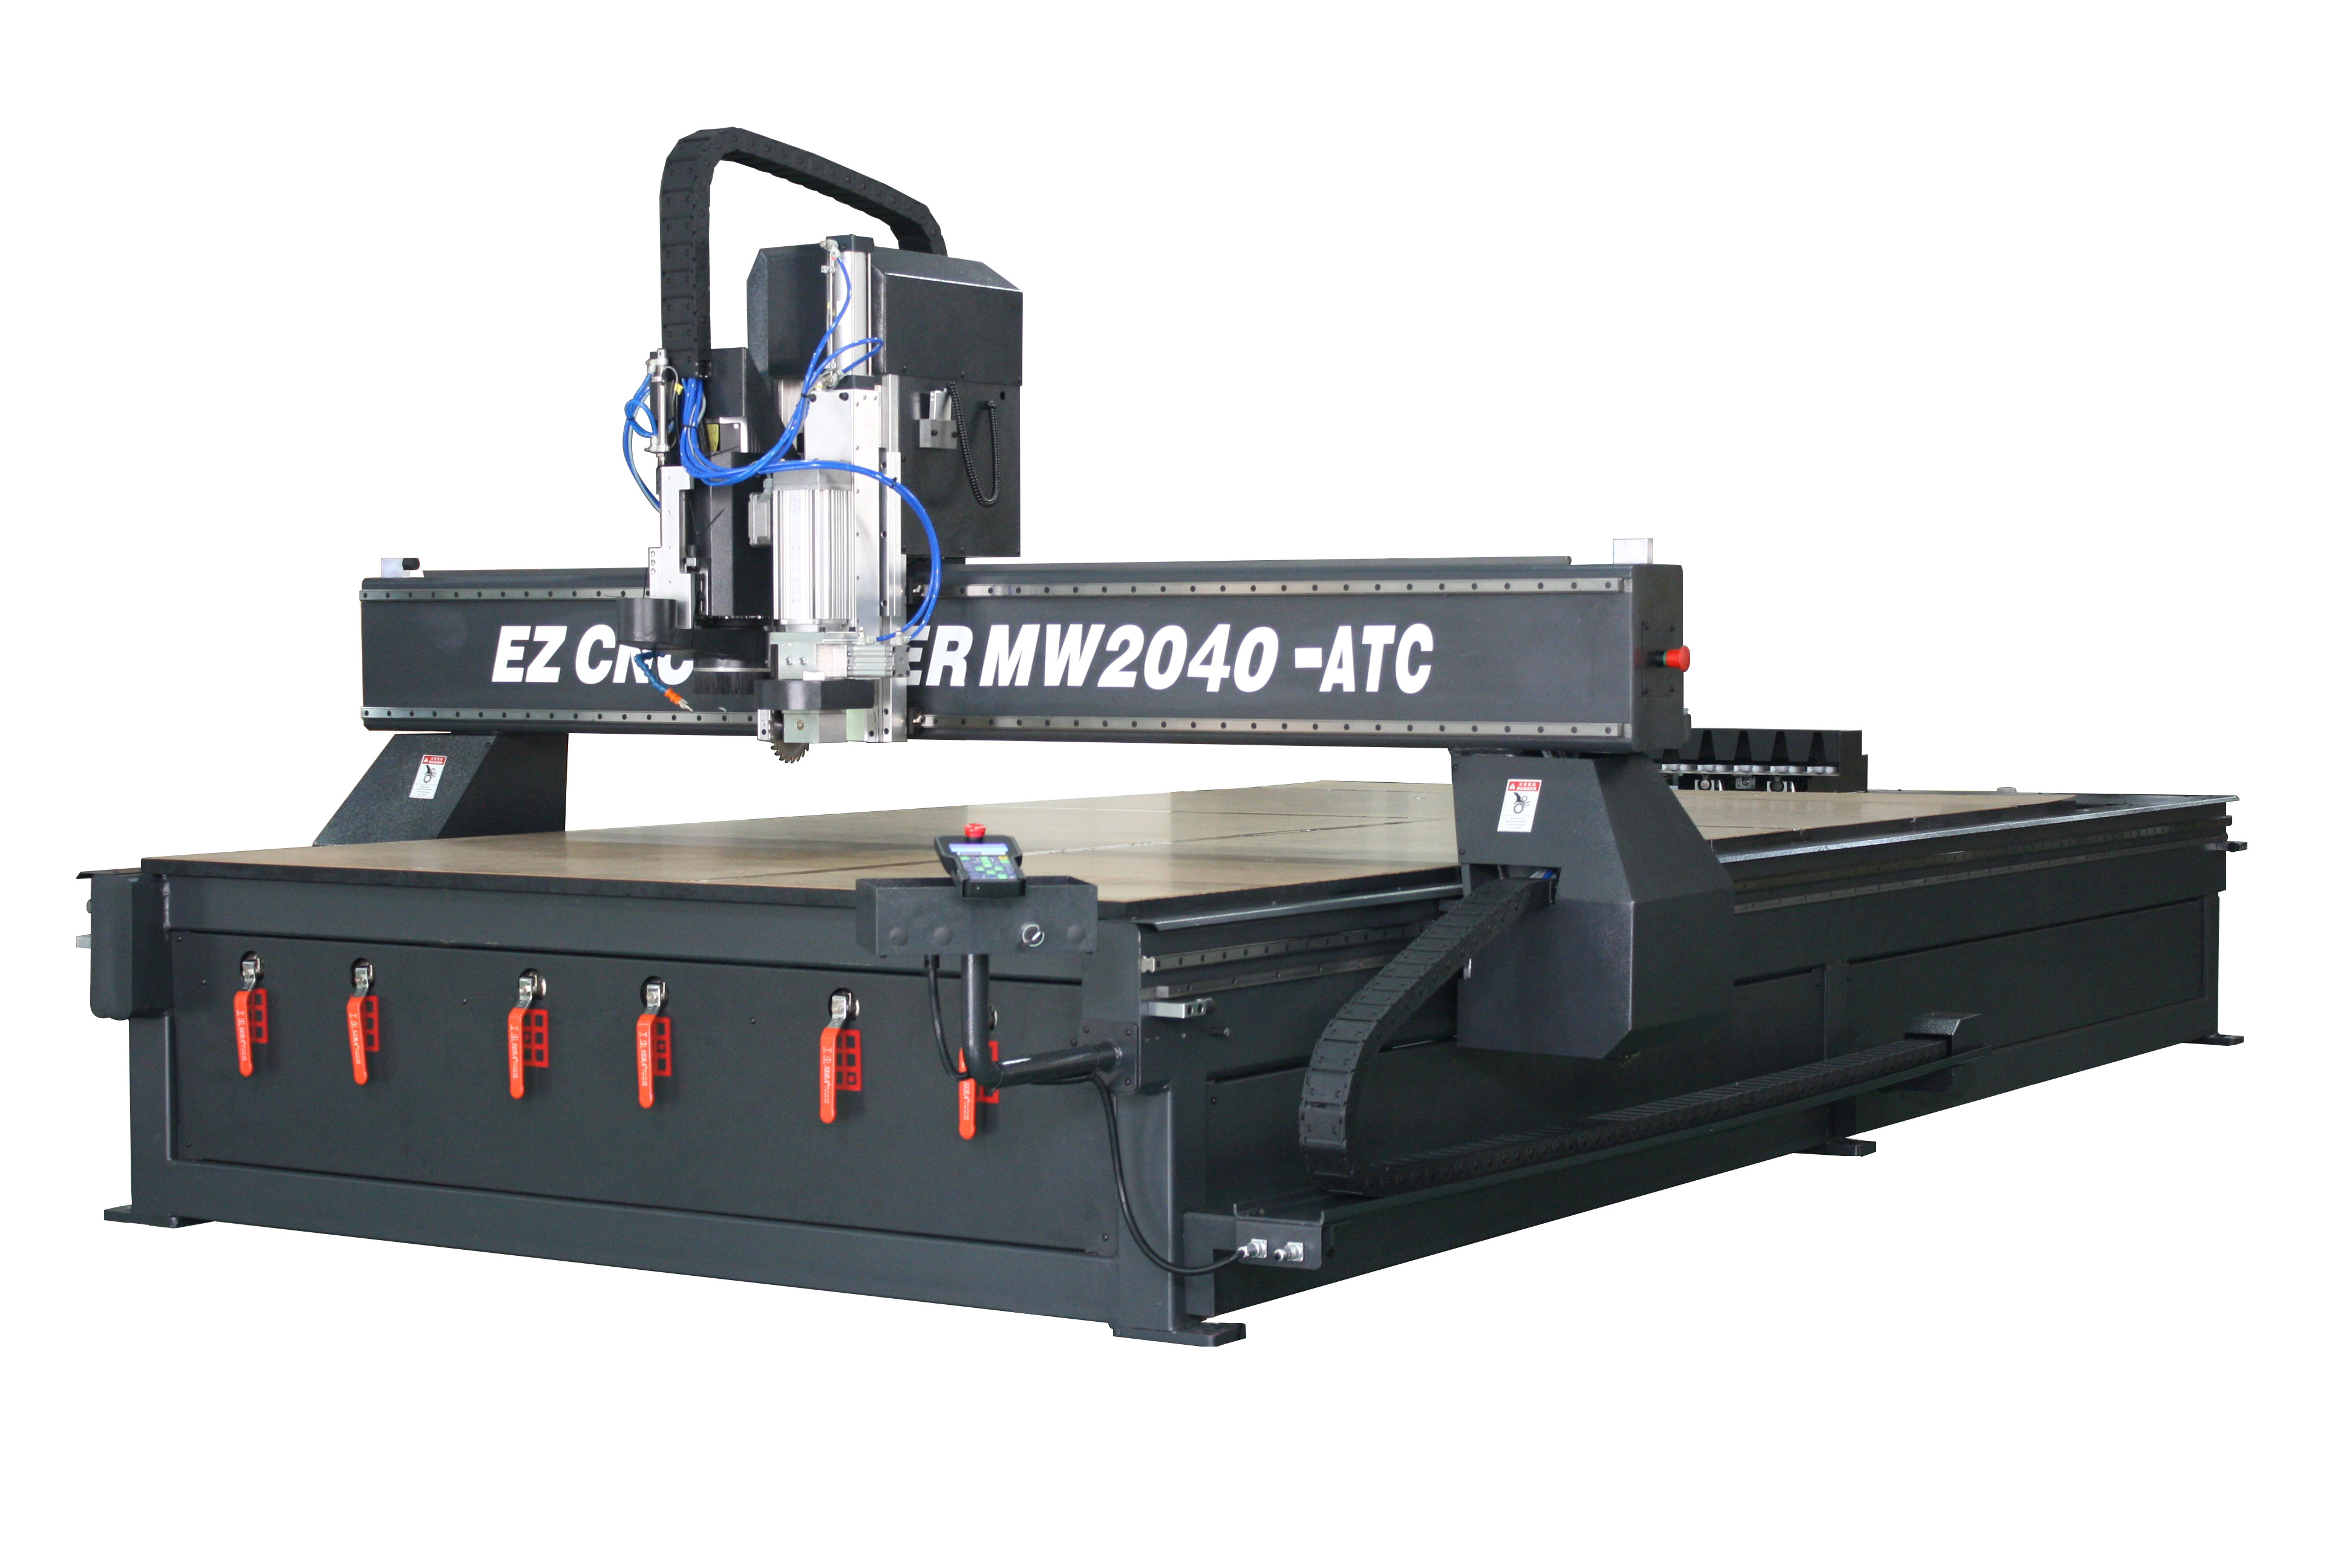  EZCNC Routers-MW 2040/Wood, Acrylic, Alu. 3D Surface; SolidSurface cutting, engraving and marking system Manufactures